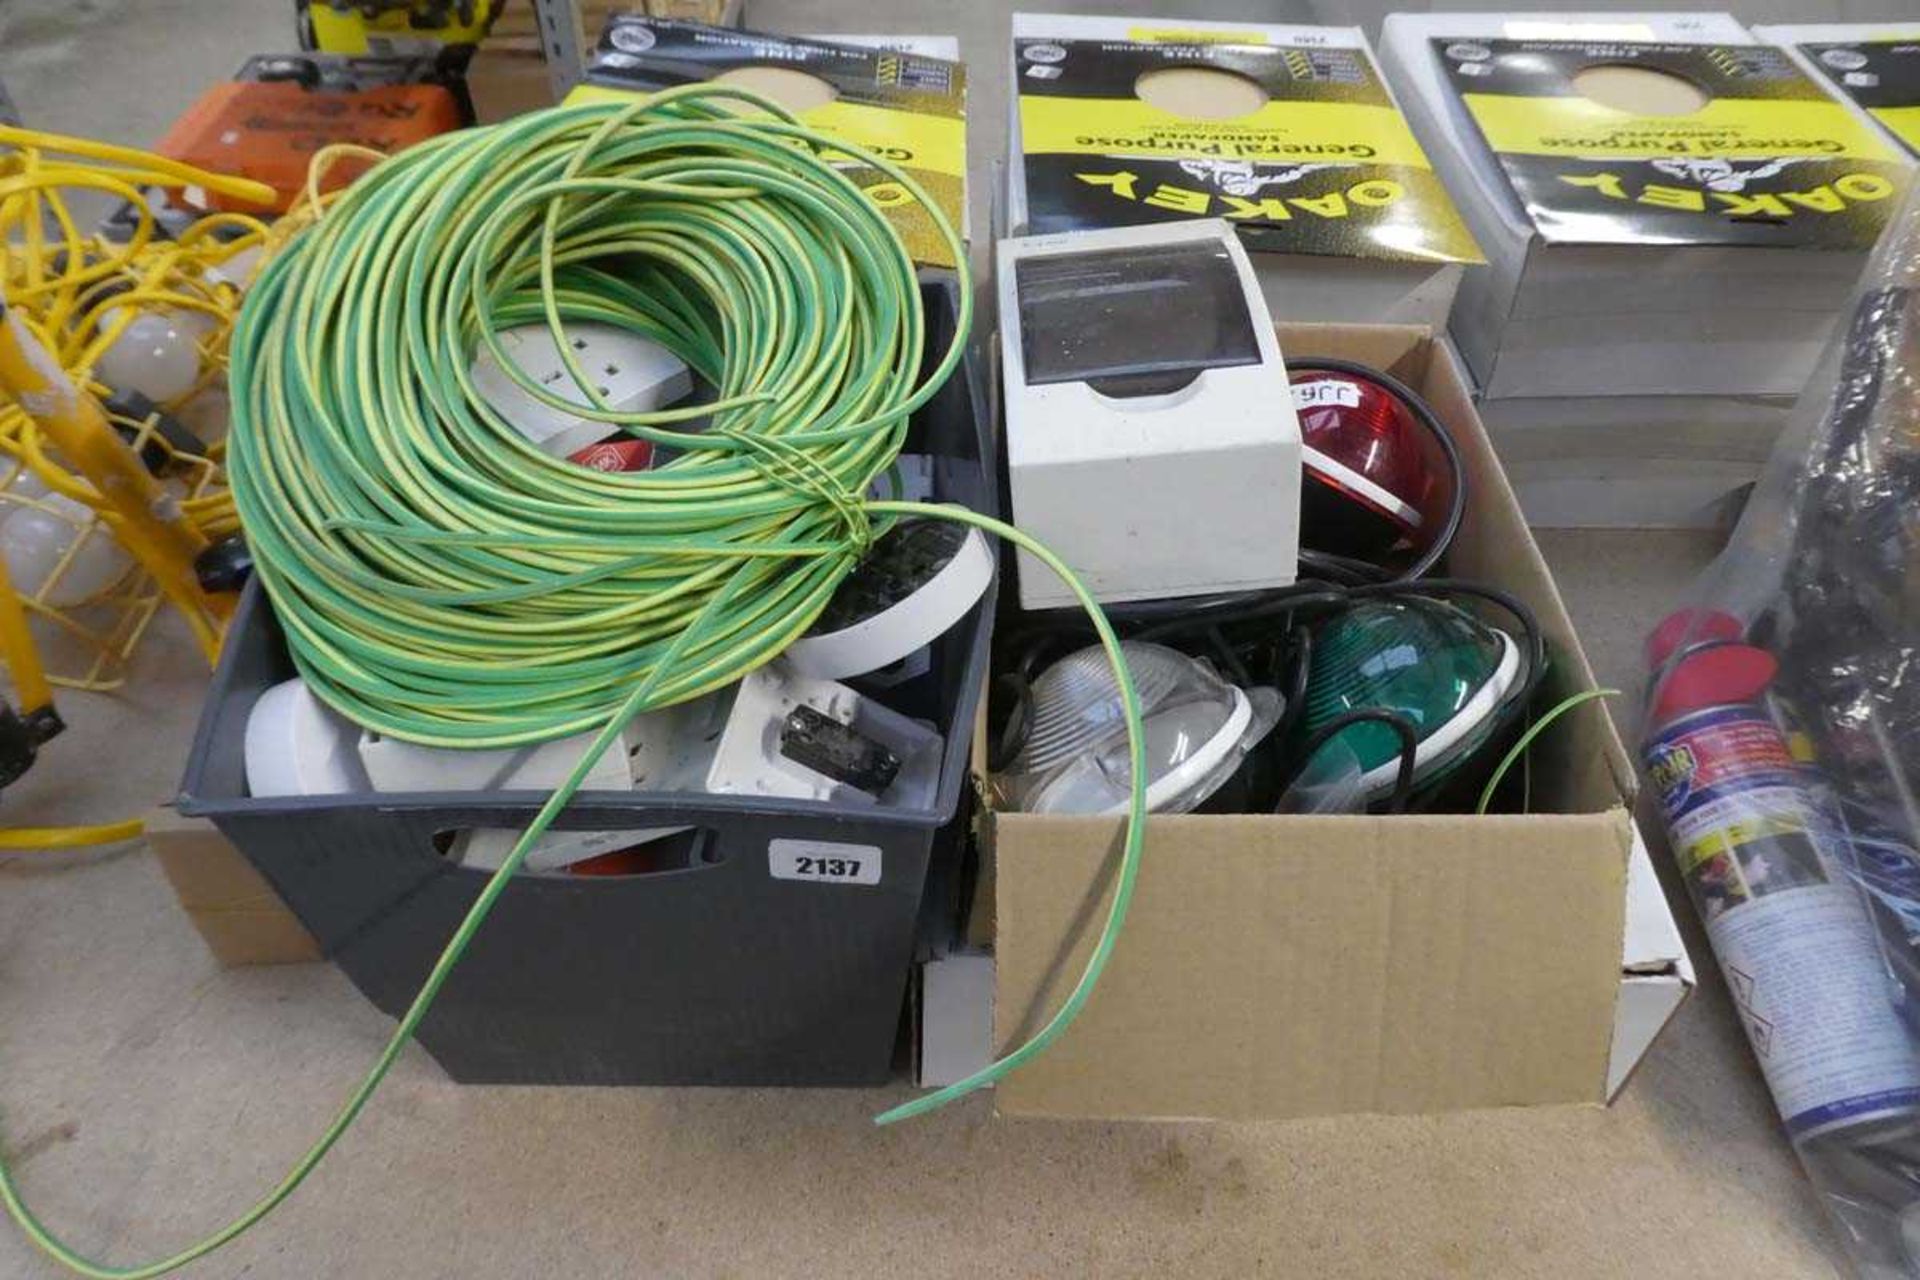 Crate of mixed electrical items and components with boxed multicoloured 3 way lighting system